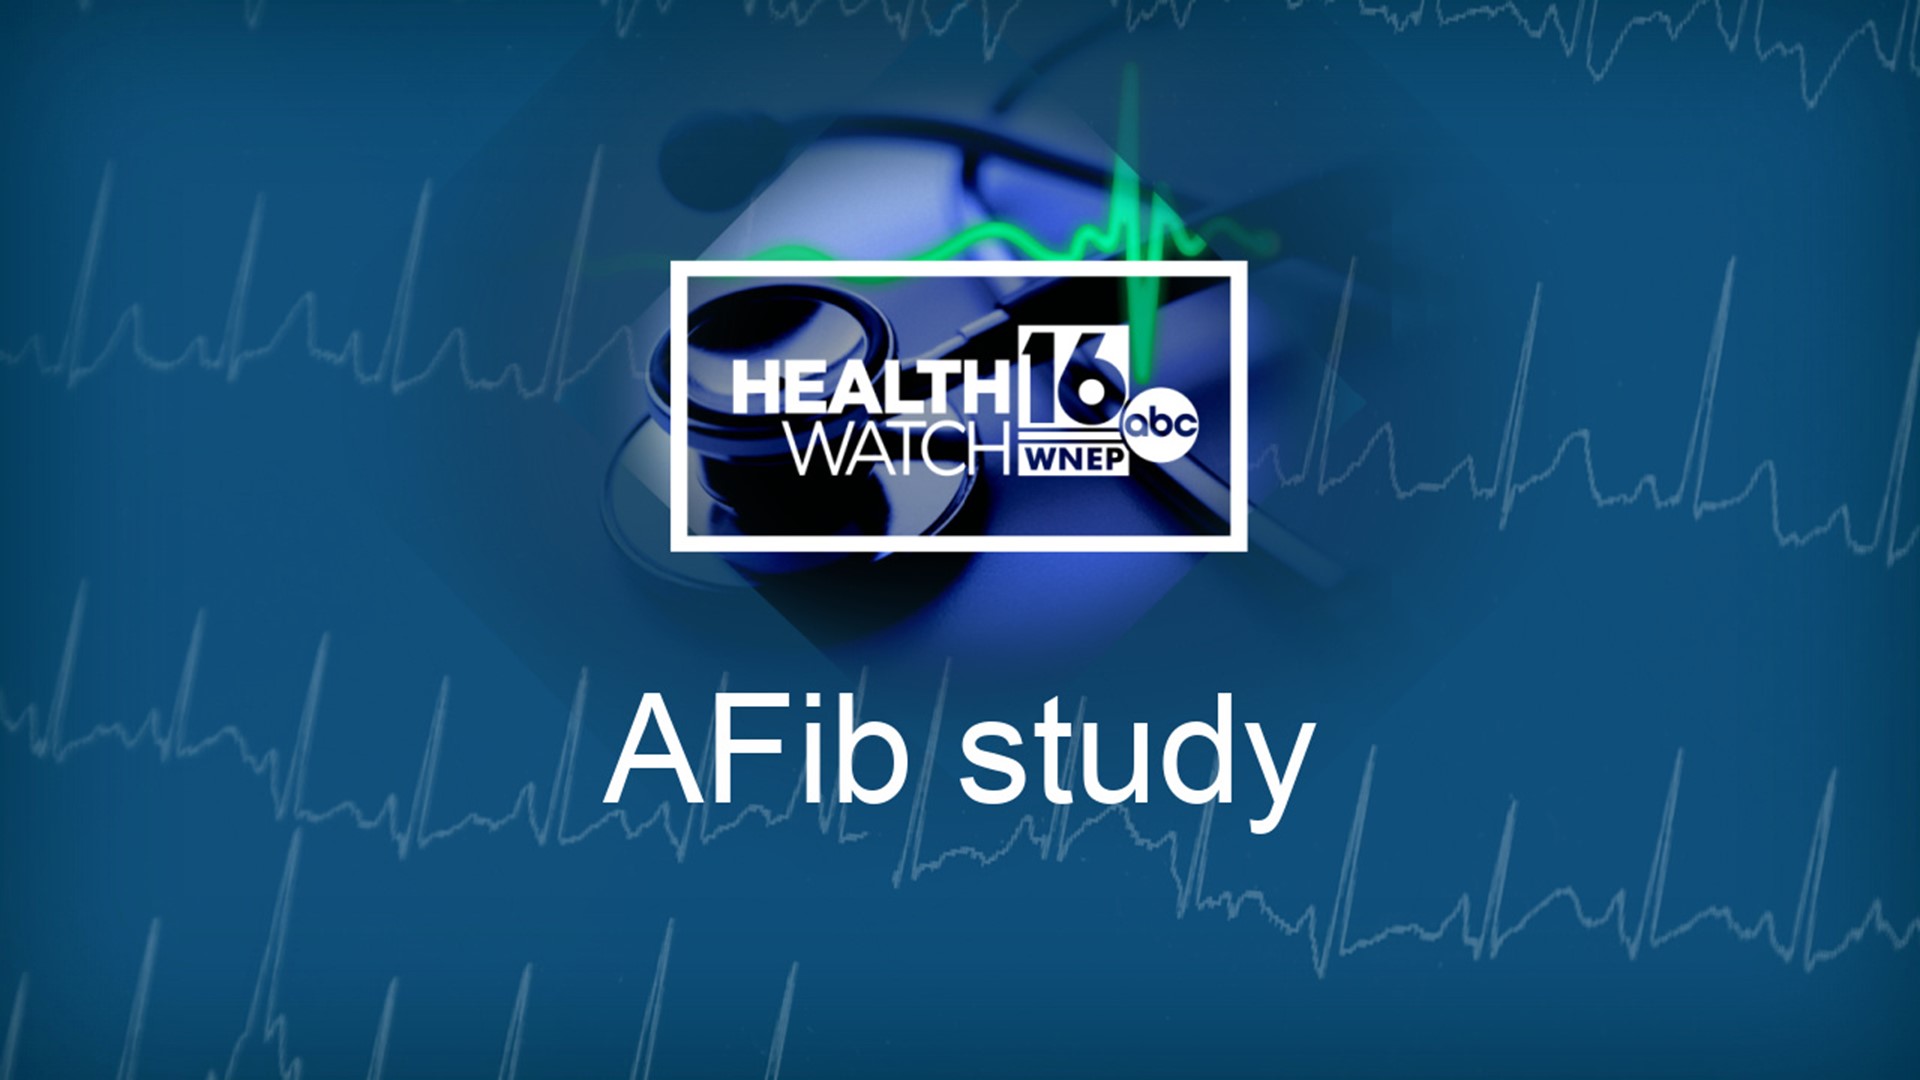 In a recently published study, Geisinger researchers found that the rates of AFib have increased significantly in past years.